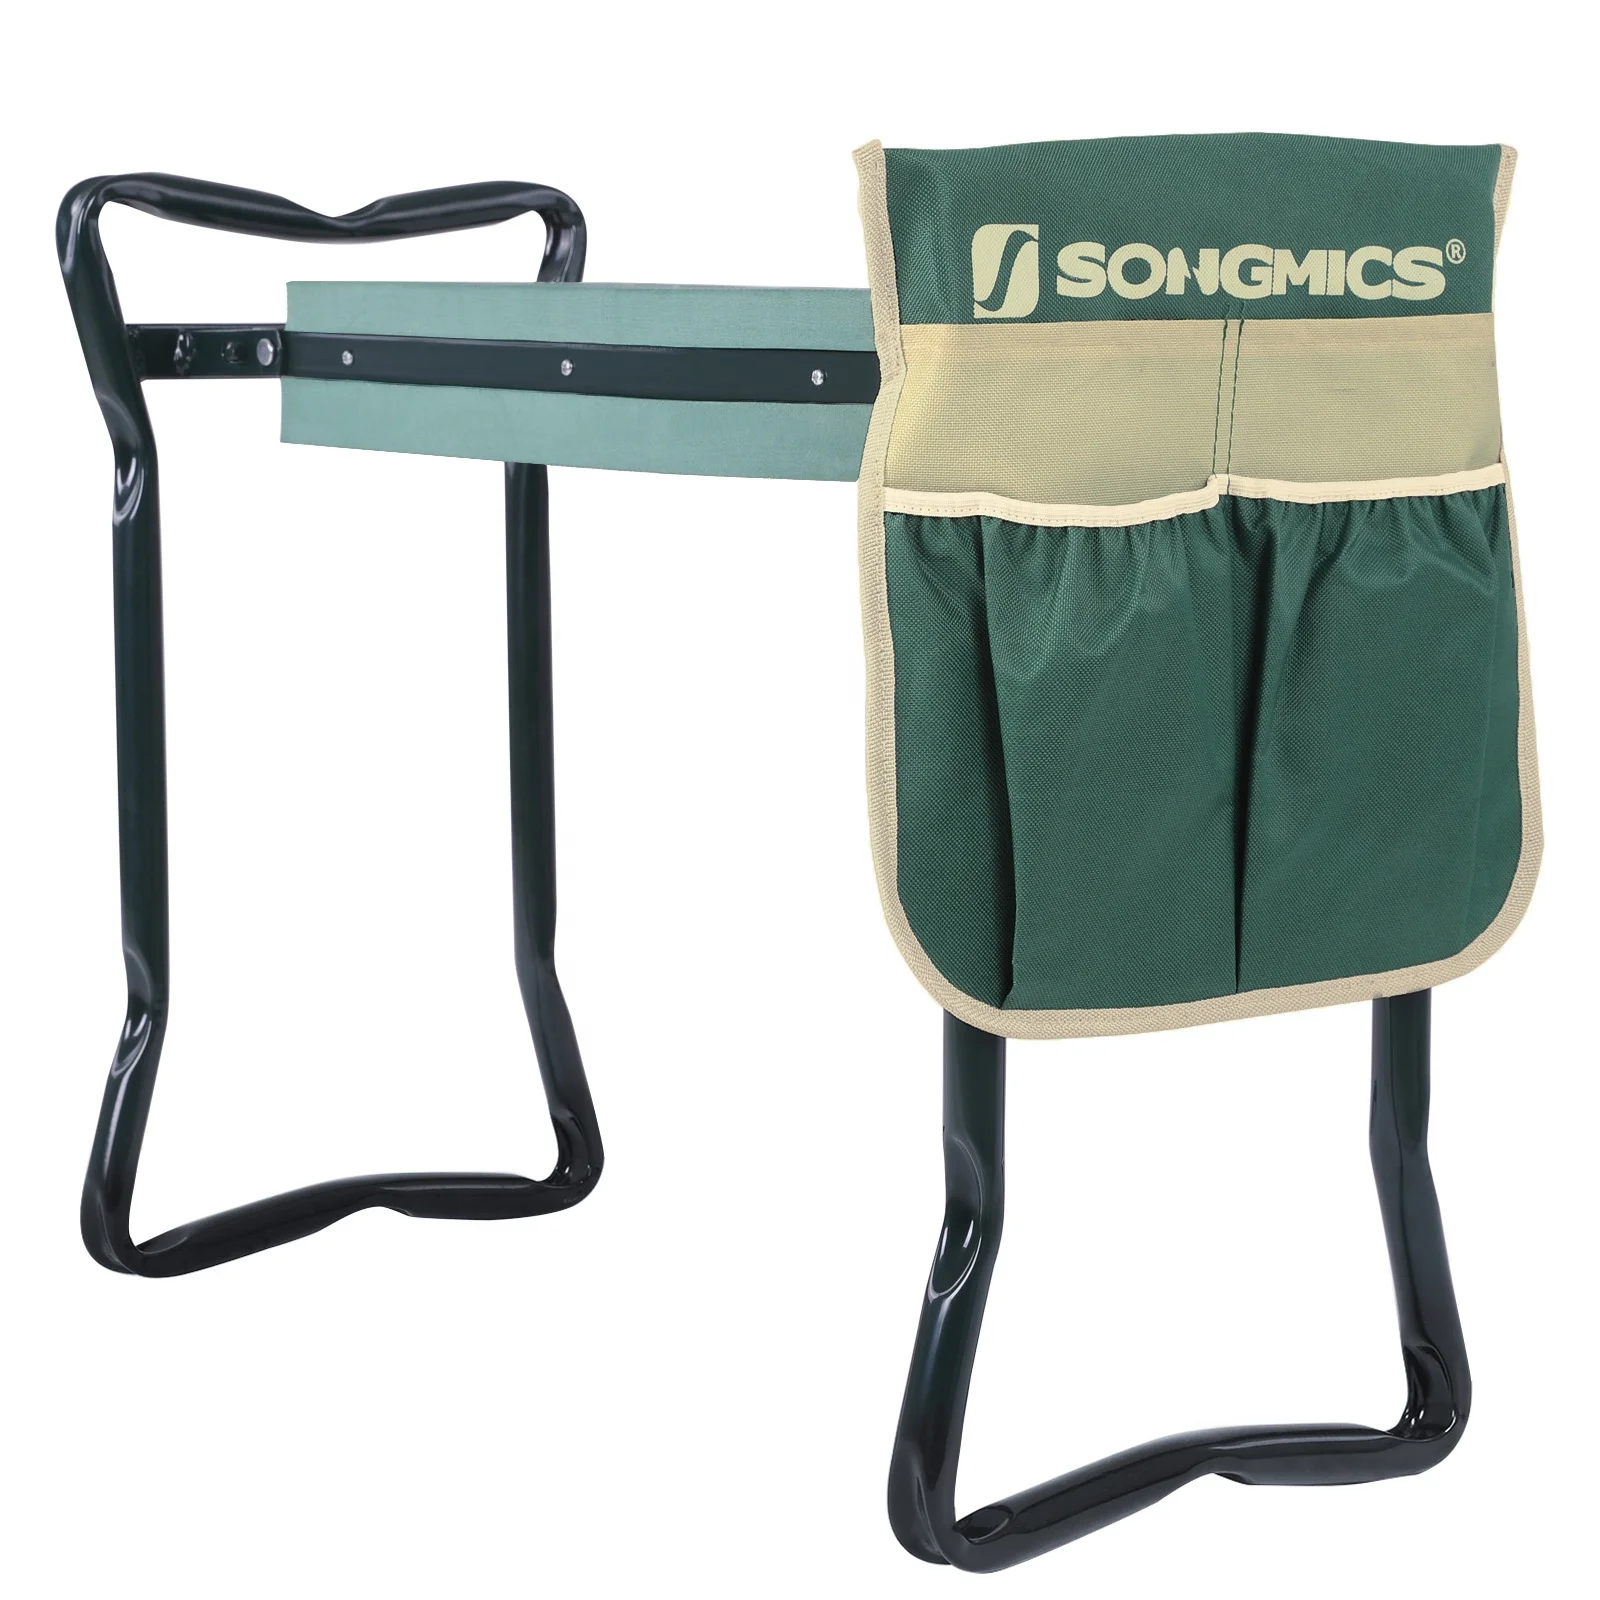 SONGMICS Garden Tools Heavy Duty Gardening Kneeling Bench with Tool Pouch Portable Foldable Garden Kneeler and Seat Stool